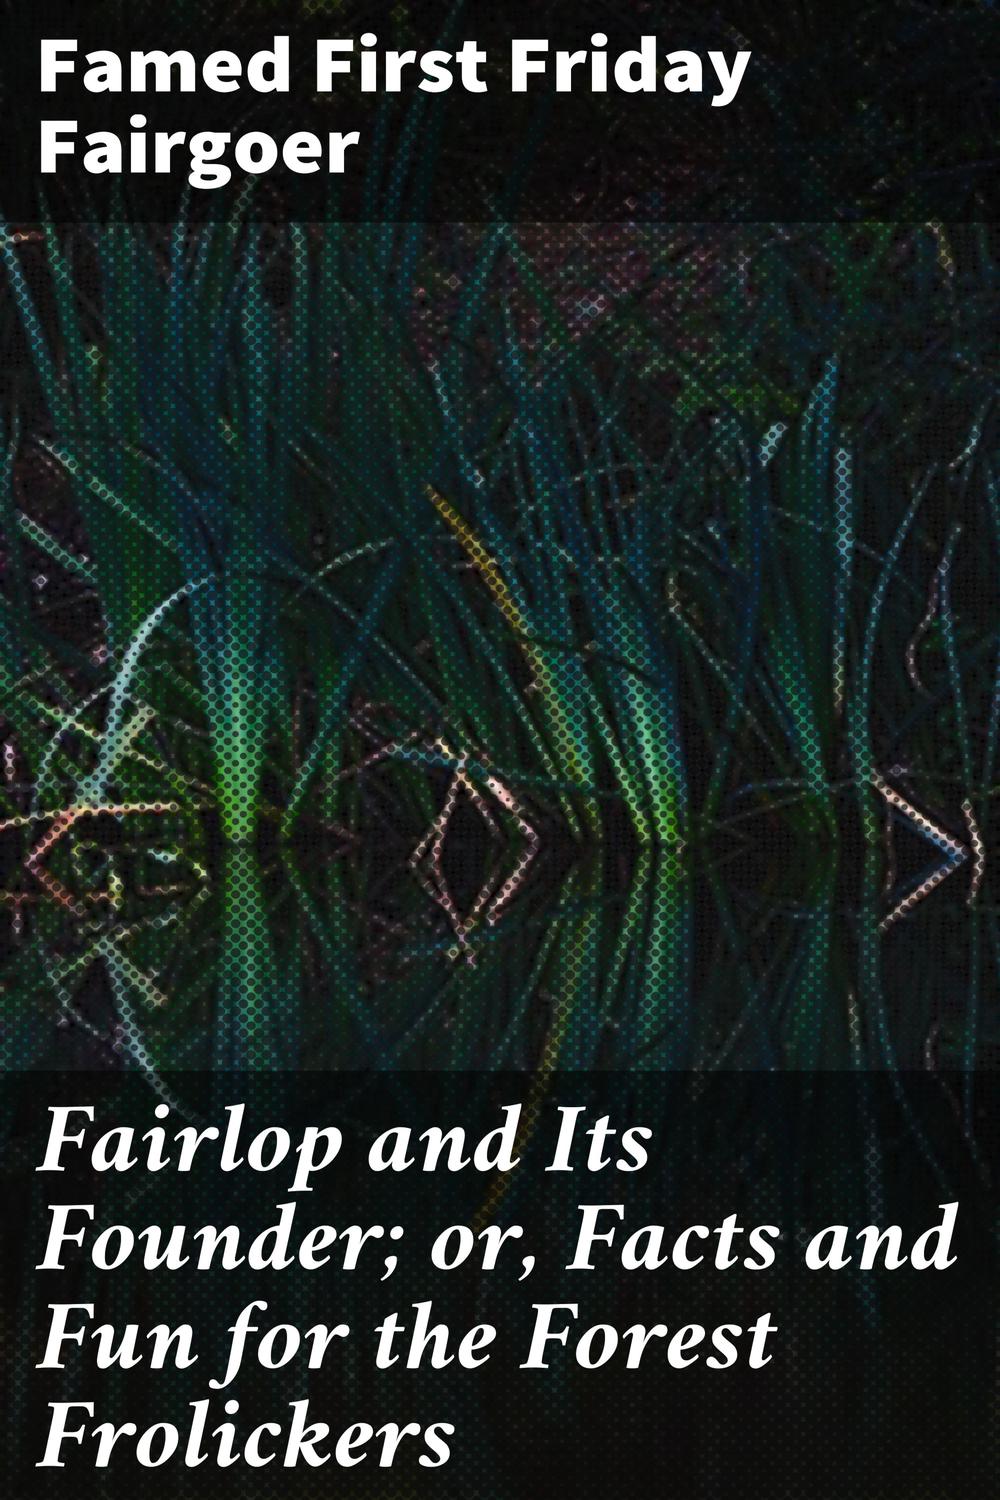 Fairlop and Its Founder; or, Facts and Fun for the Forest Frolickers - Famed First Friday Fairgoer